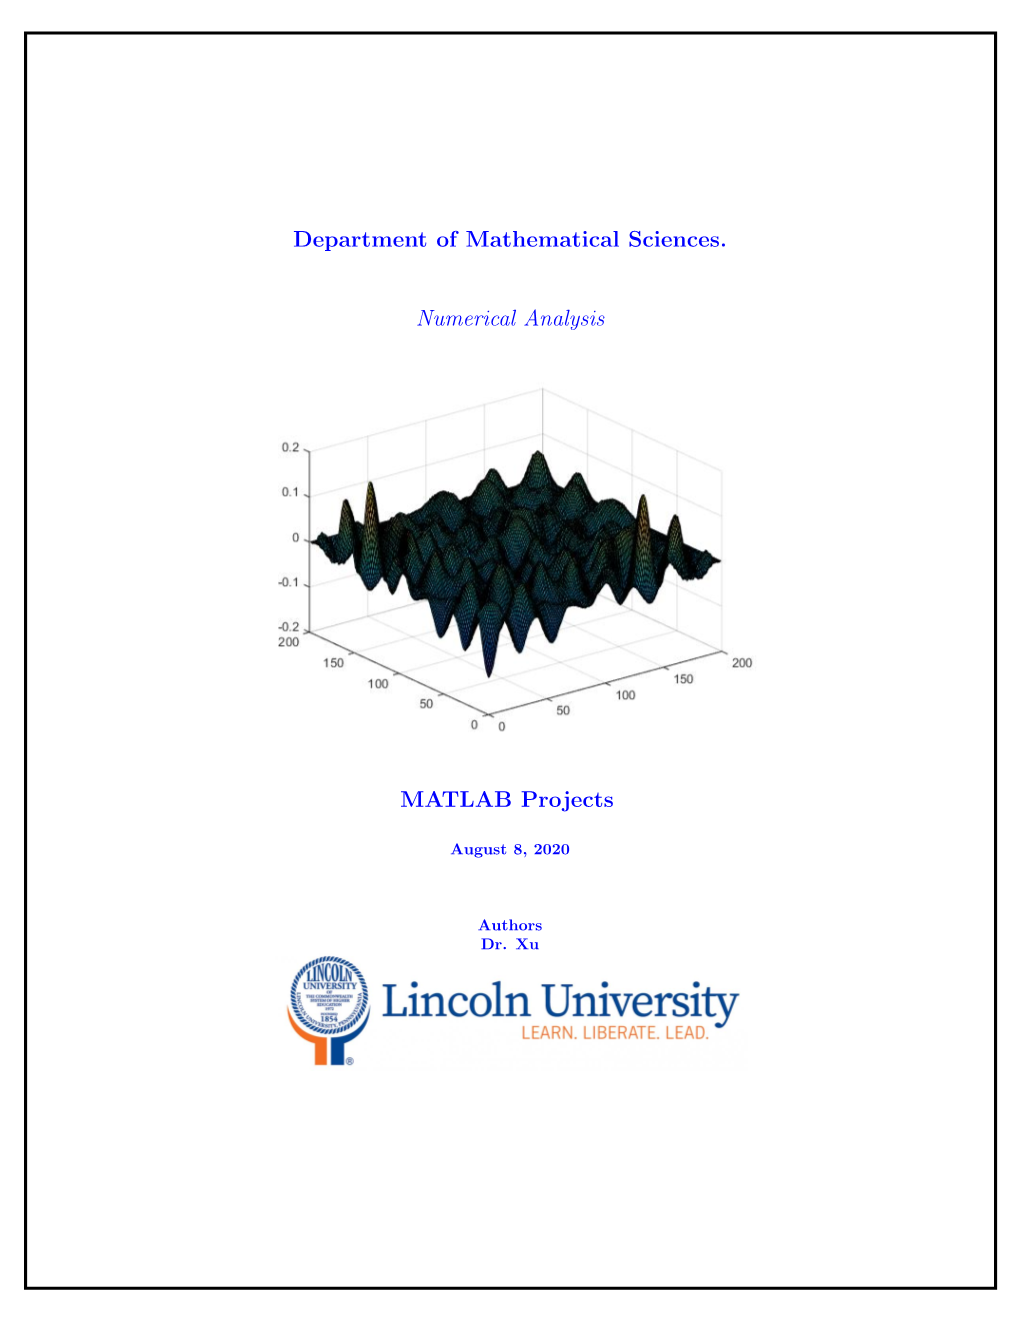 Department of Mathematical Sciences. Numerical Analysis